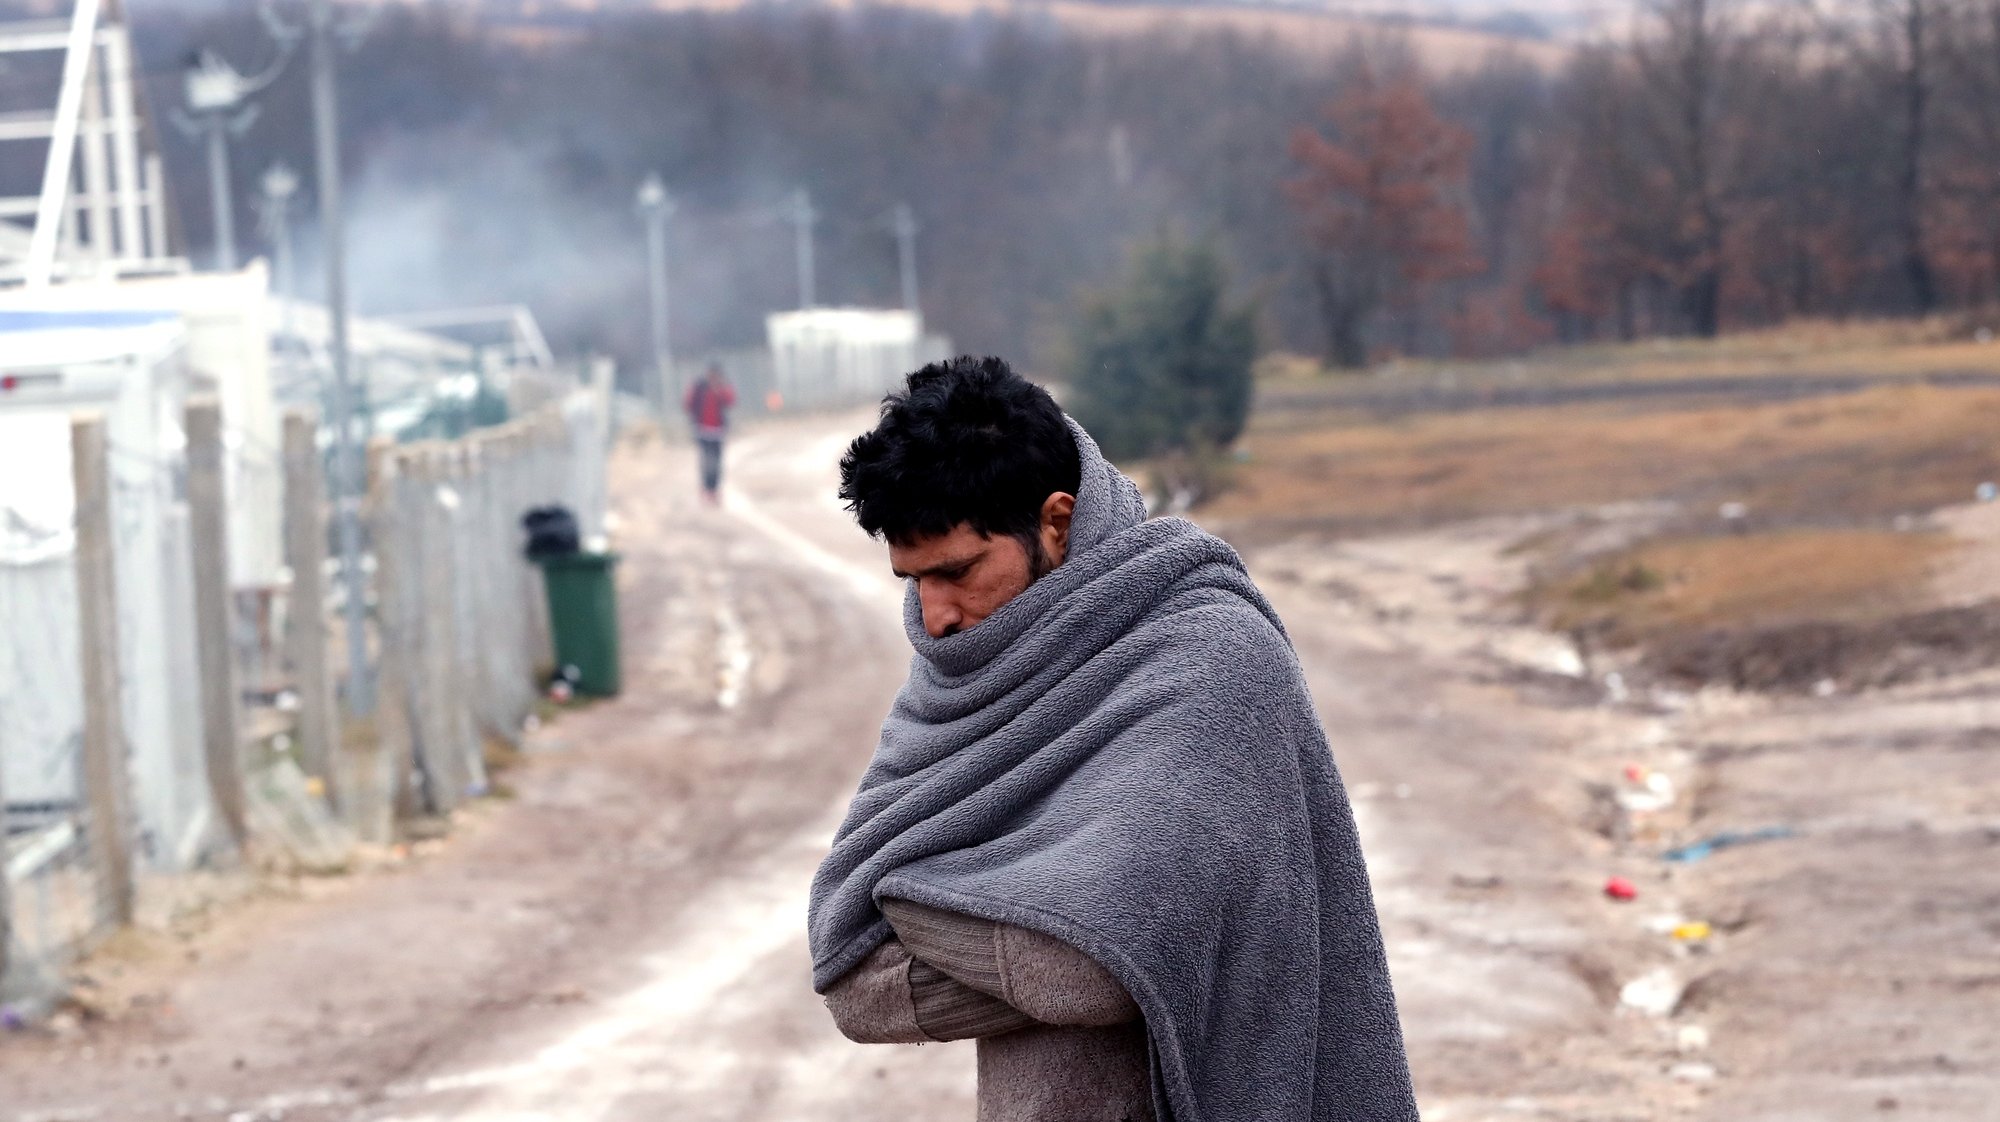 epa08914435 A migrant tries to warm himself at the Lipa camp in Bihac, Bosnia and Herzegovina, 01 January 2021. Some thousand refugees at the camp were scheduled to be relocated from the burnt-down tent camp on 31 December, yet were returned to Lipa camp. A fire on 23 December destroyed most of the camp near the city of Bihac, which has already been sharply criticized by international authorities and aid groups as unsuitable for accommodating refugees and migrants.  EPA/FEHIM DEMIR